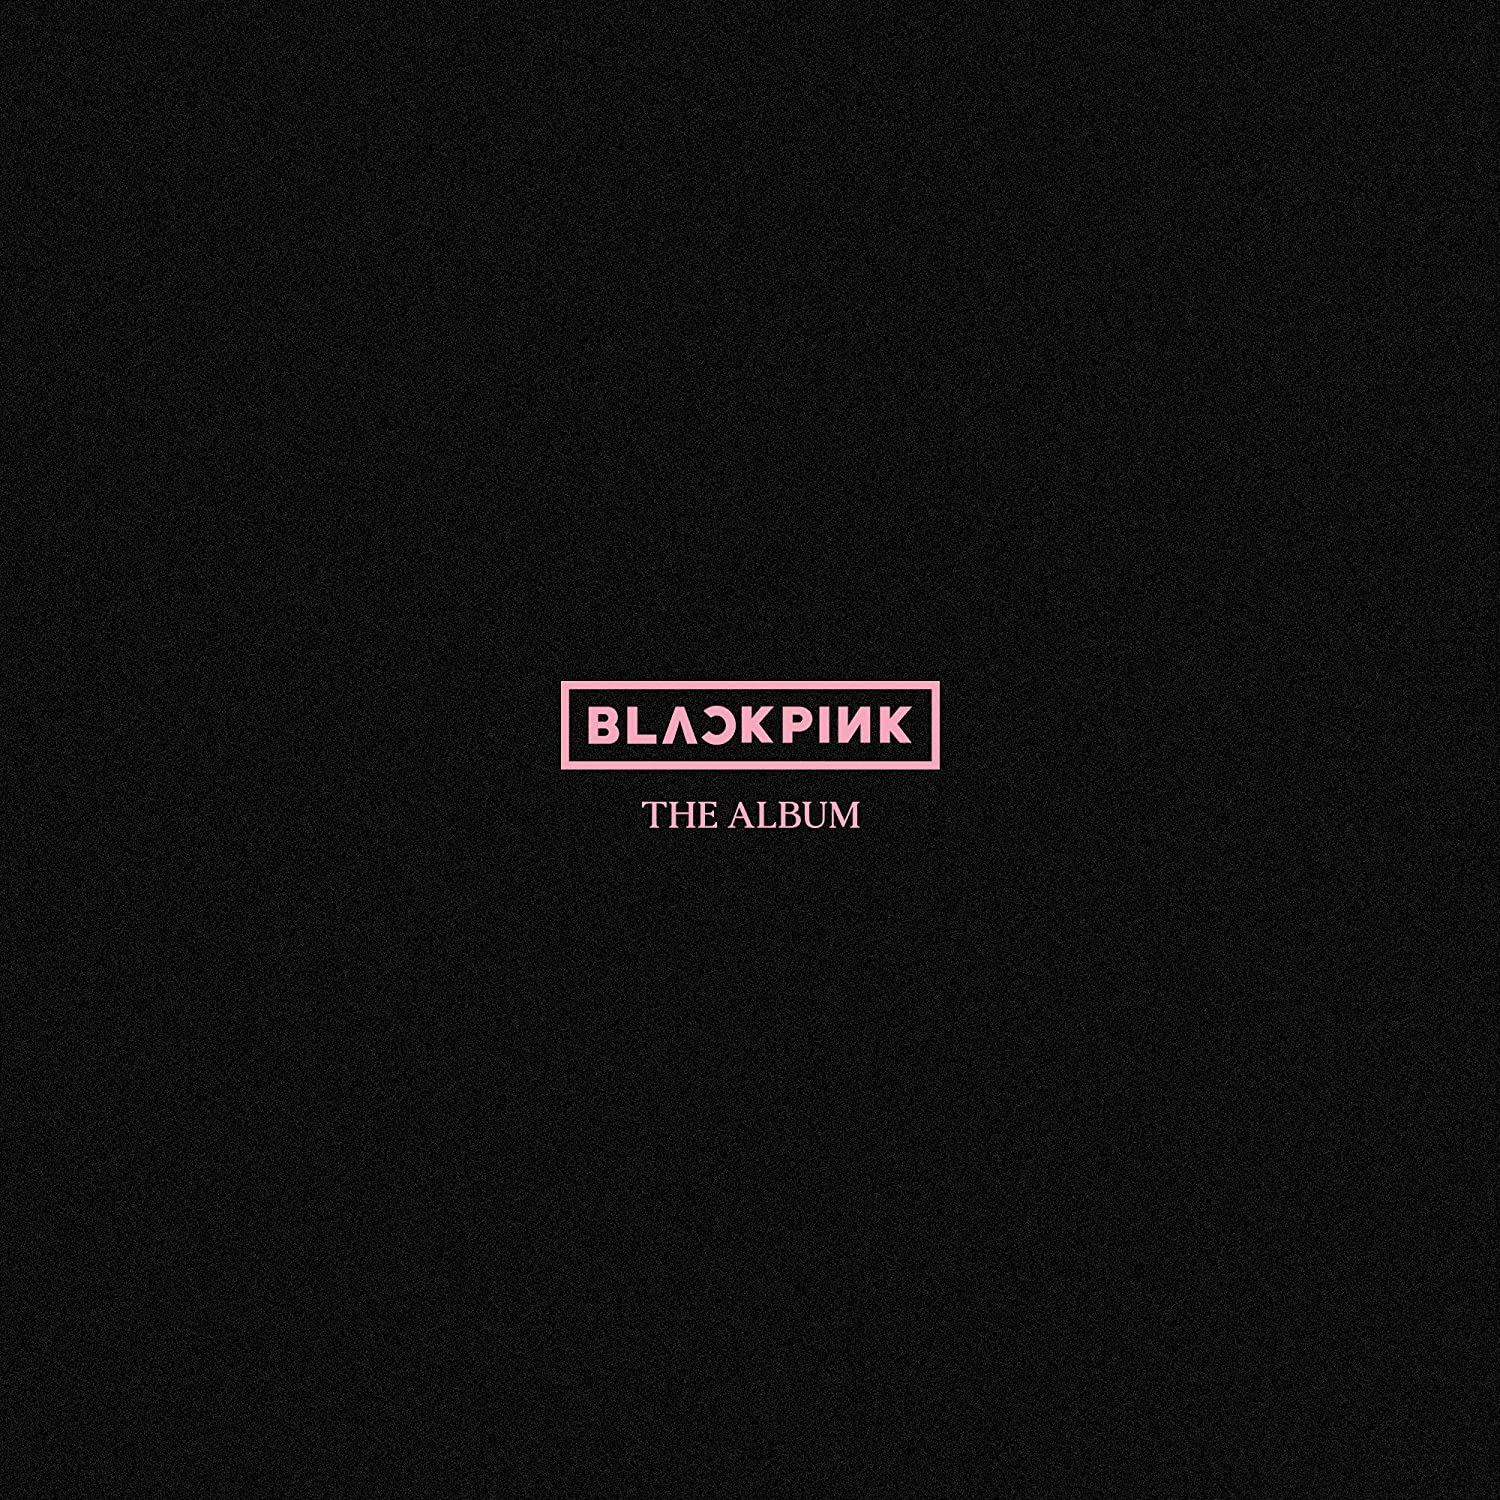 Blackpink Releases New Song 'The Girls' for Game